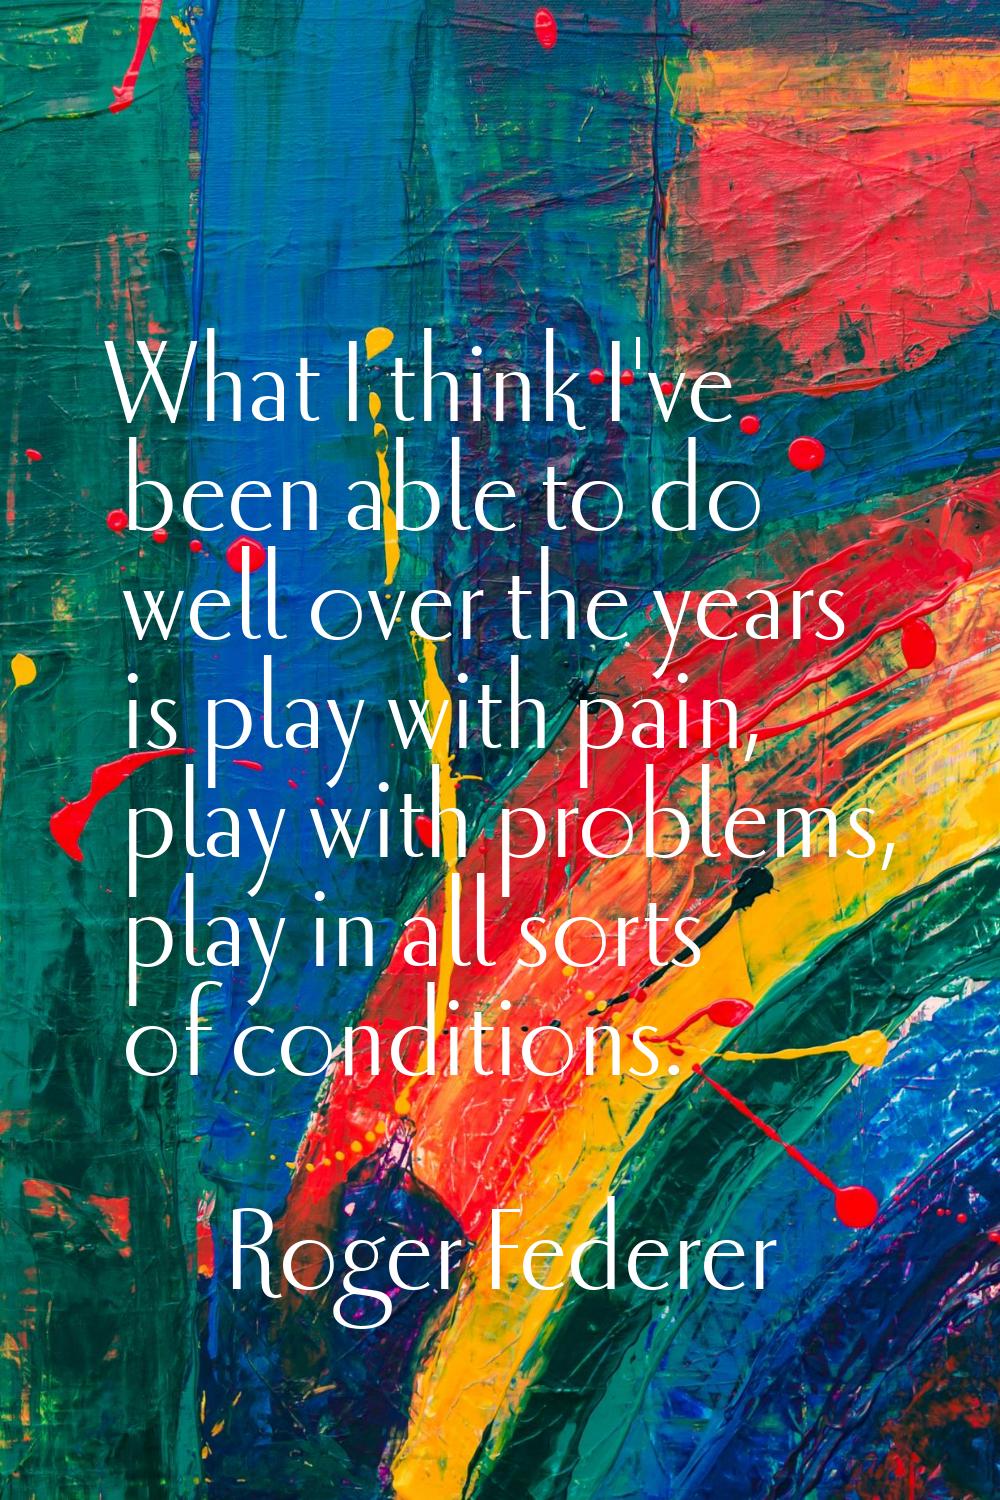 What I think I've been able to do well over the years is play with pain, play with problems, play i